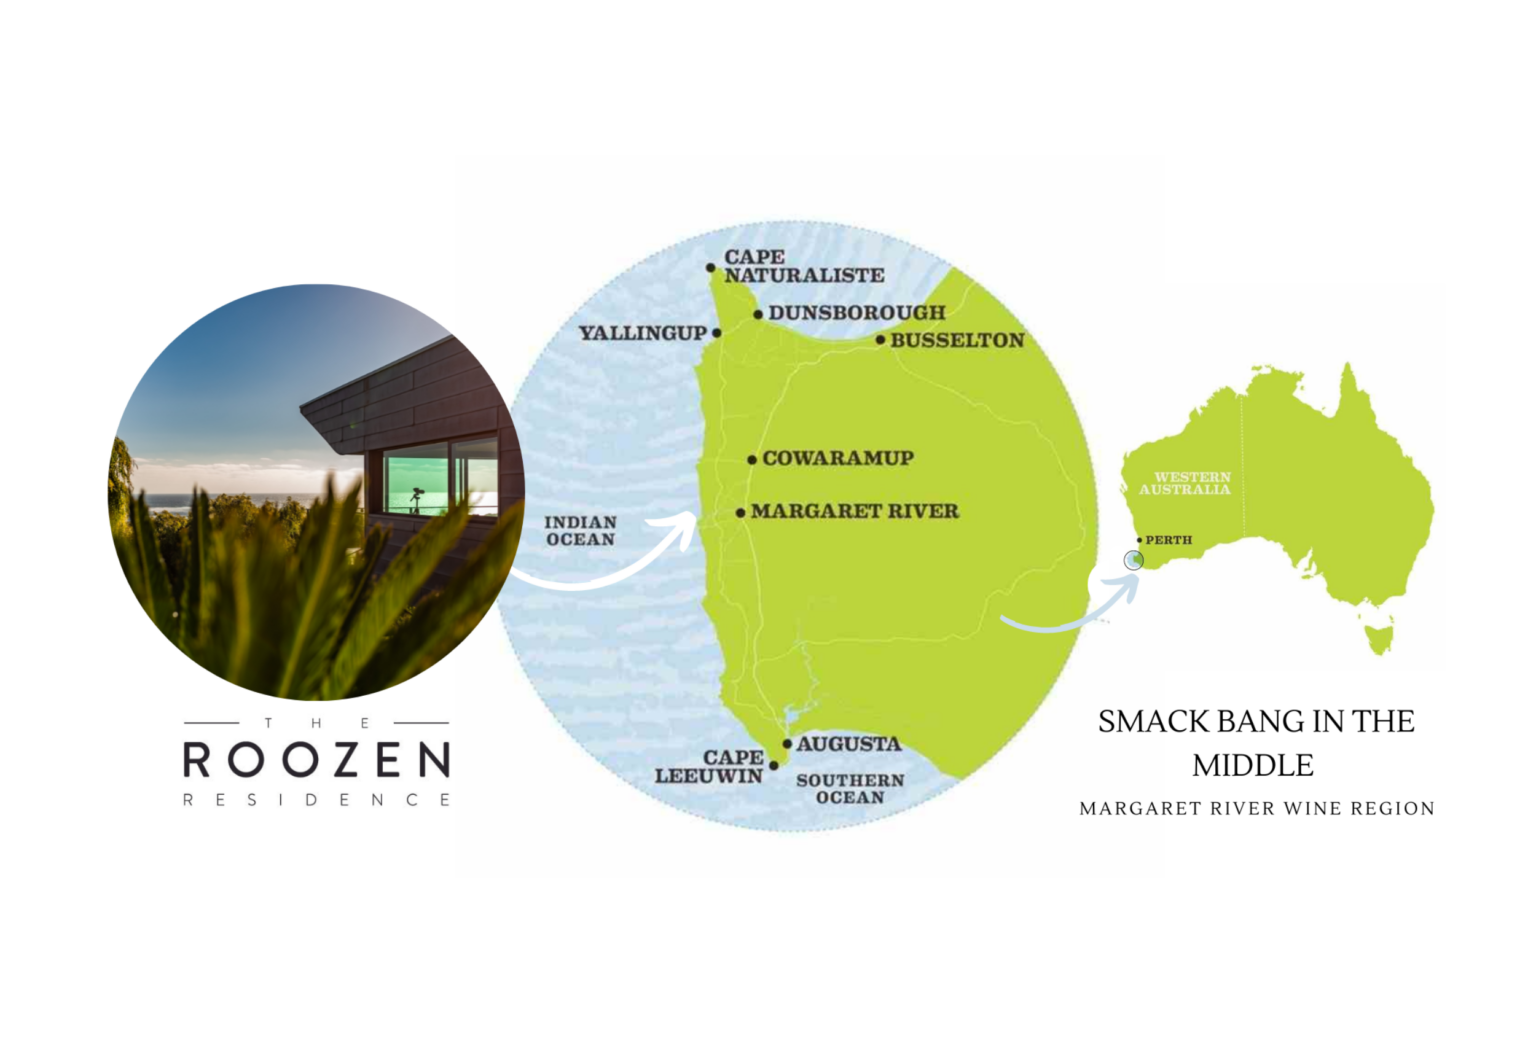 Diagram showing location of holiday property in the middle of the Margaret River wine region.